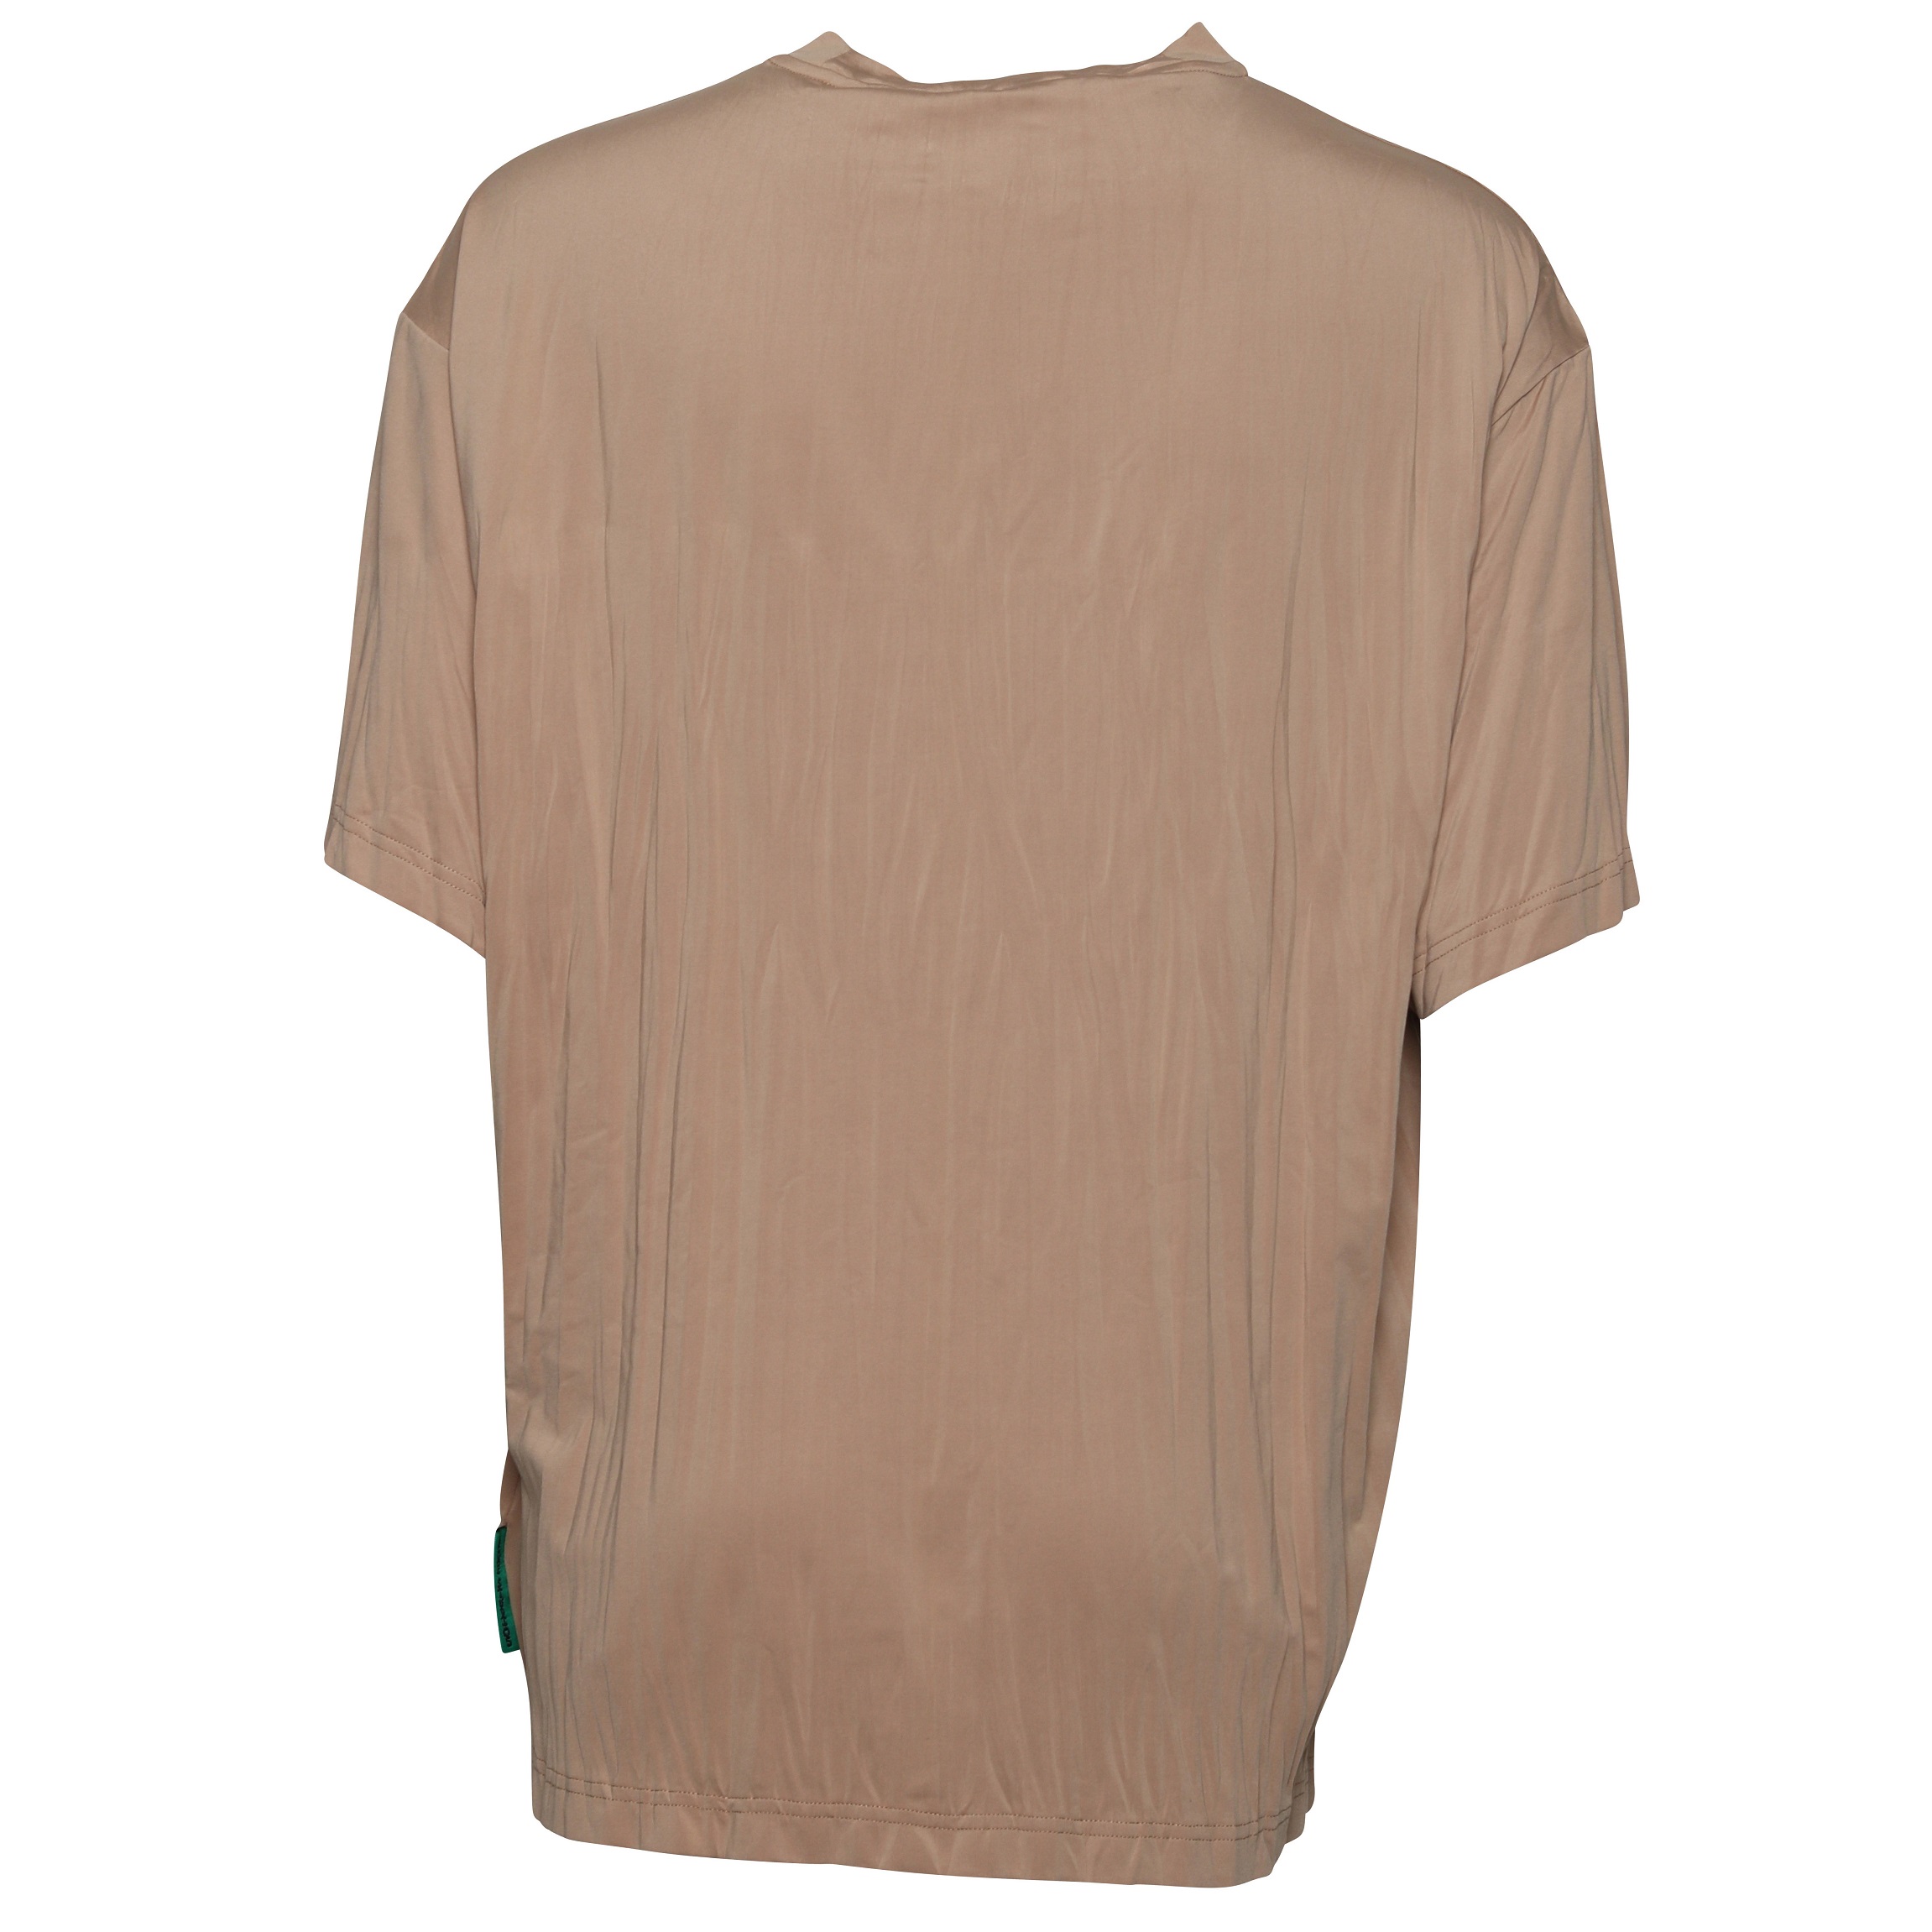 Acne Studios Pleated T-Shirt in Camel Brown XS